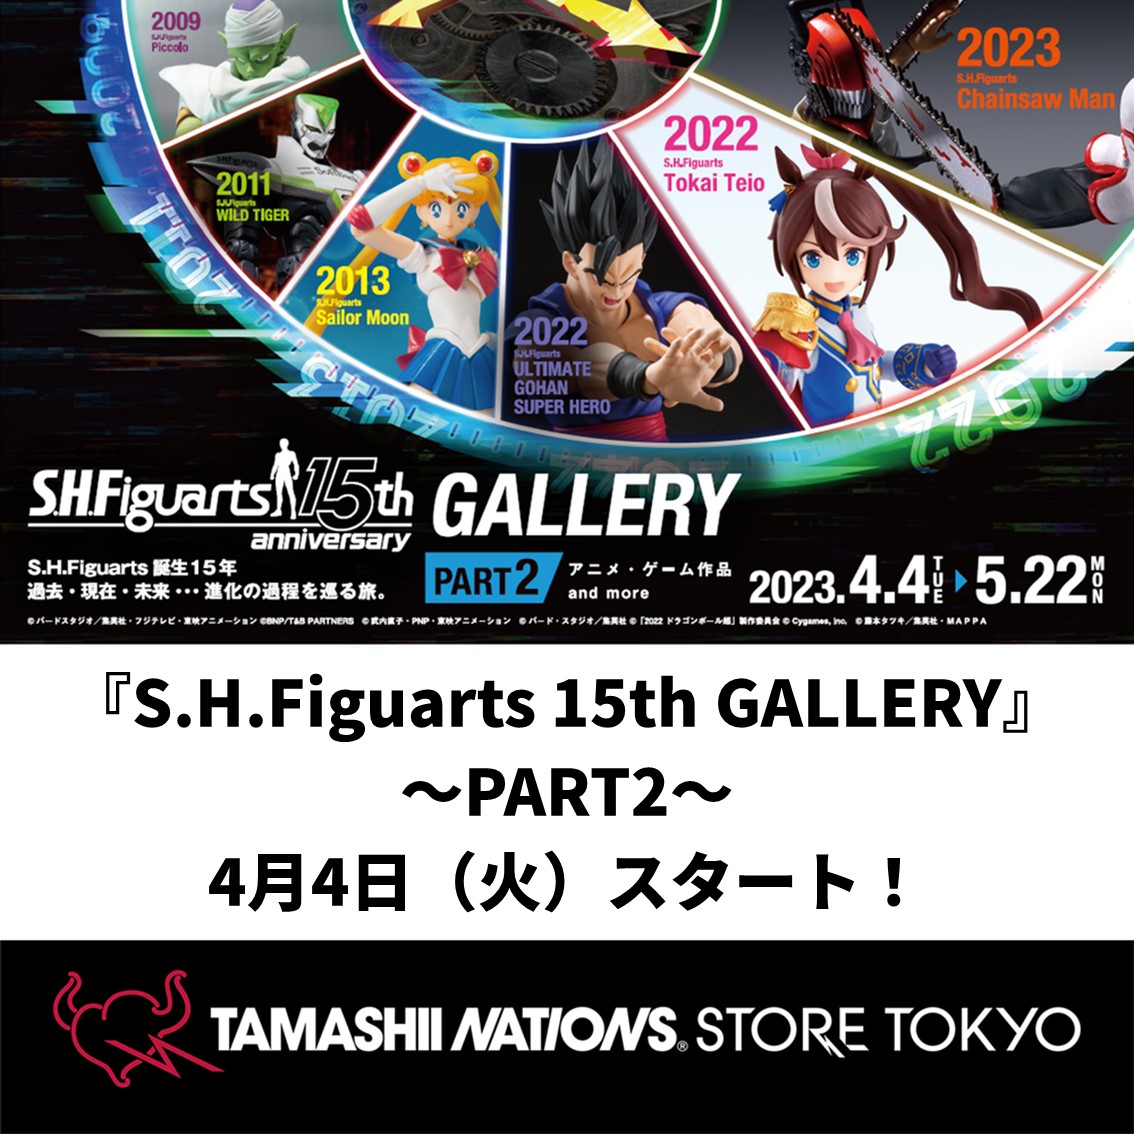 Special website [TAMASHII STORE] exhibition event "S.H.Figuarts 15th GALLERY - PART2" starts!